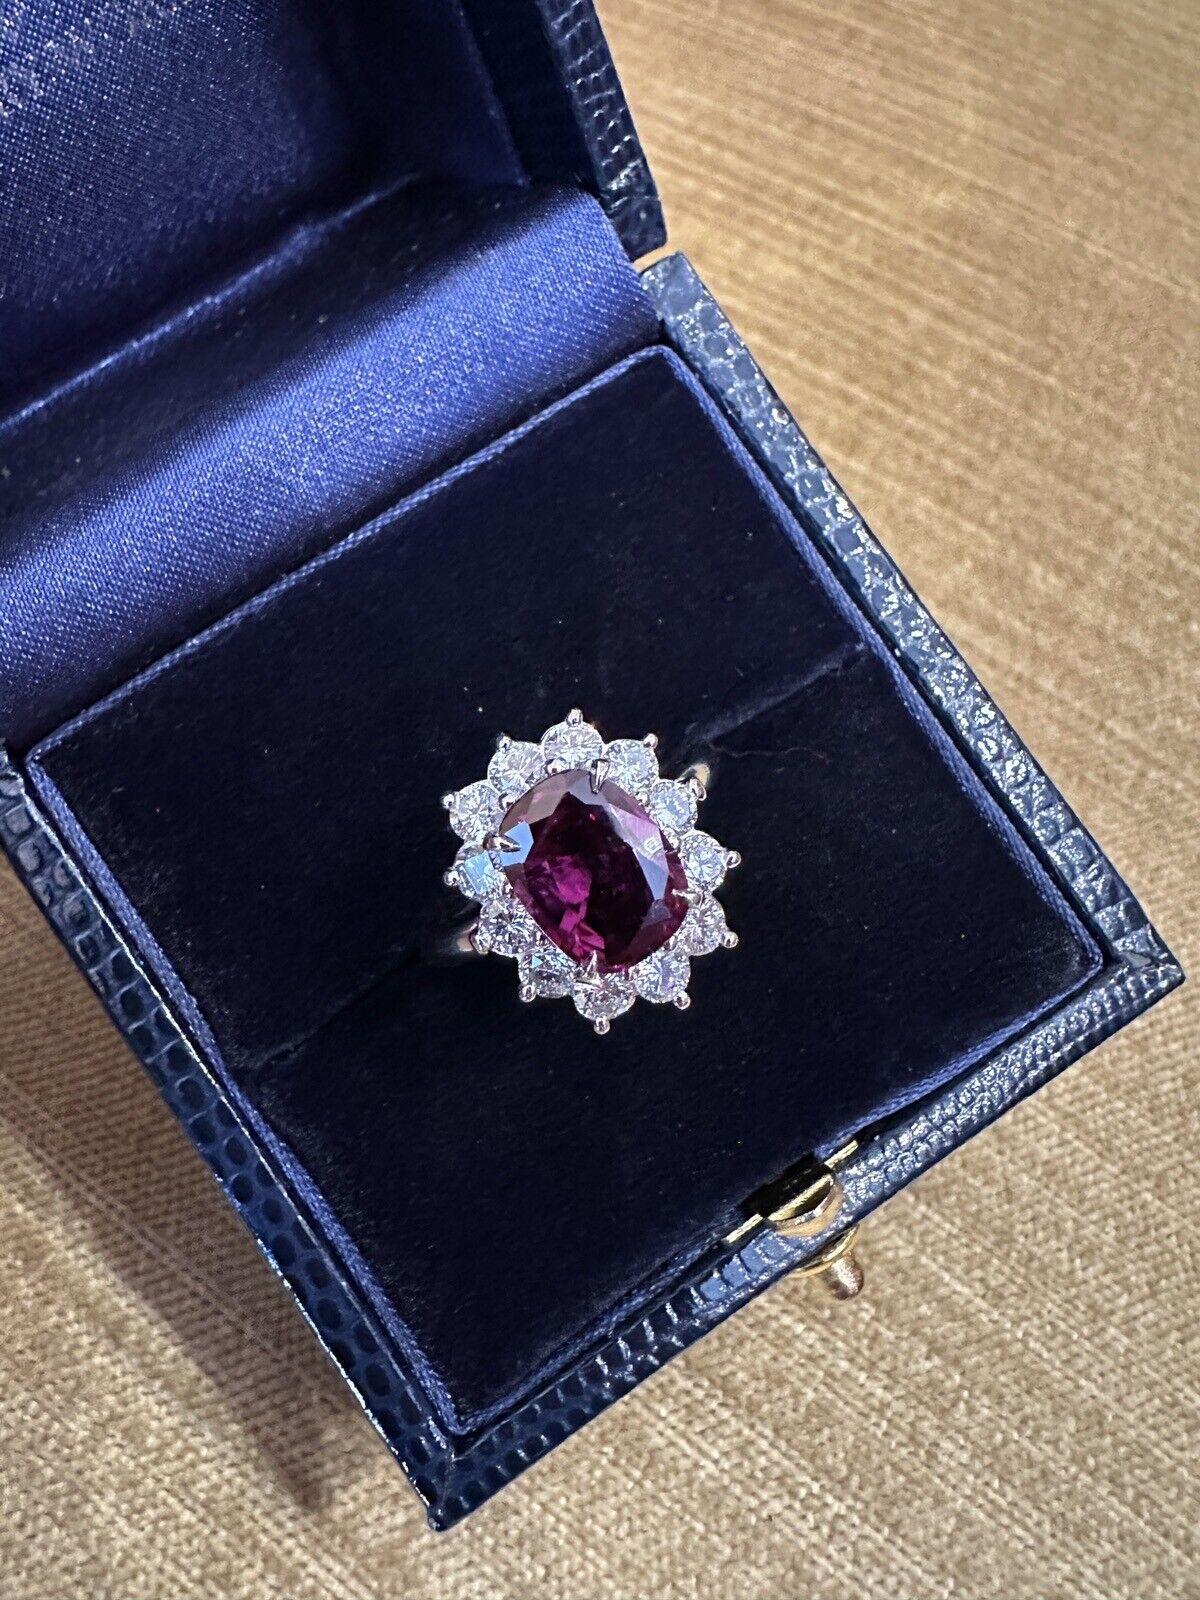 GIA Unheated Natural Ruby 2.68 Carat in Diamond Halo Ring in Platinum 3